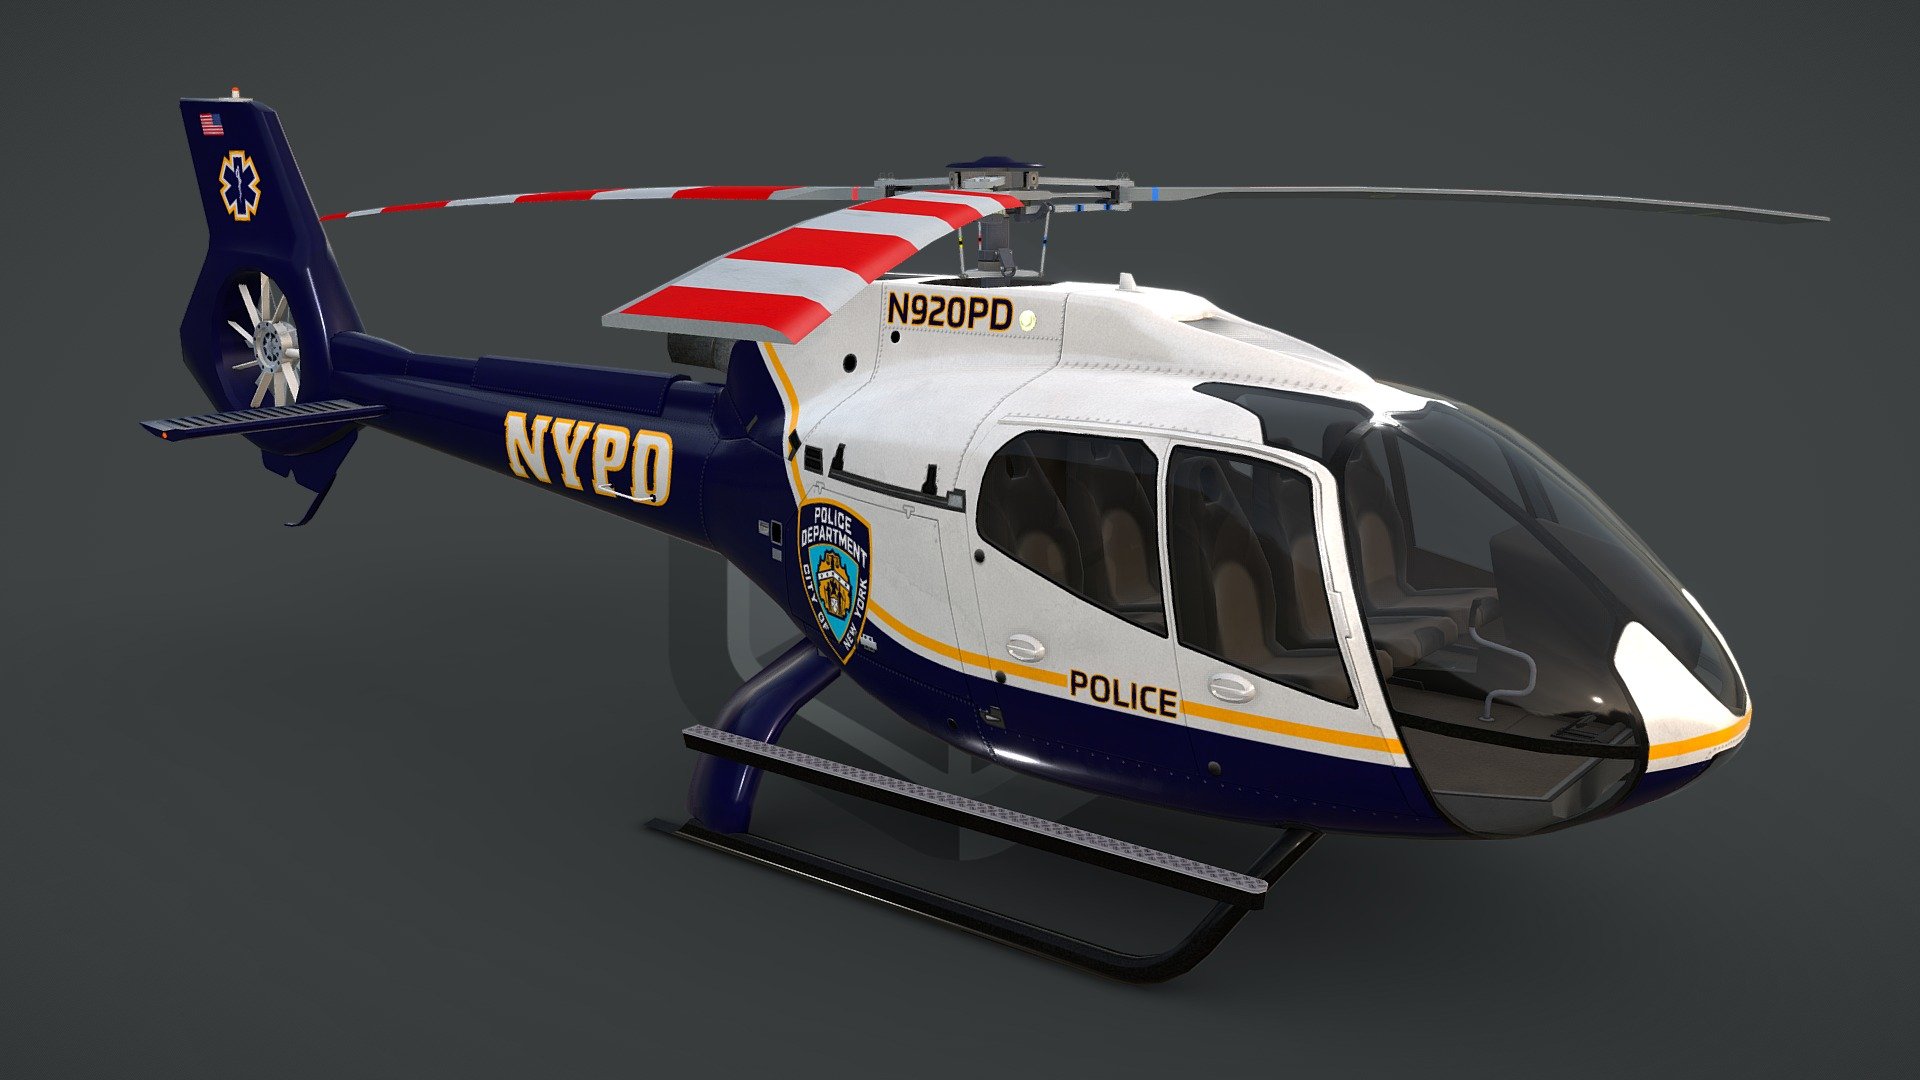 game ready, realtime optimized game asset

unique livery and branding

both PBR workflows ready

LOD0 is HQ lowpoly with bended top rotor, all lights objects and interior

LOD0 19710 tris, LOD1 10462 tris, LOD2 7388 tris, LOD3 5990 tris

100% triangulated and 100% unwrapped non-overlapping

5 x uv layouts, body, HQ rotors, LQ rotors, interior, lights

made using blueprints, real world scale meters

all rotors detached and animable in each LOD with properly placed pivots for flawless animations

hideable capsule built interior that fits perfectly the body

interior is simple but a great basis for further elaboration

big textures pack with native 4096 x 4096 px textures for body, rotors, interior

LOD3 rotors have own textures with blades on alpha channel

light objects have own, small, textures, and contain an emission map

pack contains native .max scene, created in 3dsmax 2014

pack contains clean and flawless FBX and OBJ files

each LOD and all LOD together exported in each file format
 - NYPD Helicopter EC130-H130 Livery 10 - Buy Royalty Free 3D model by CGAmp 3d model